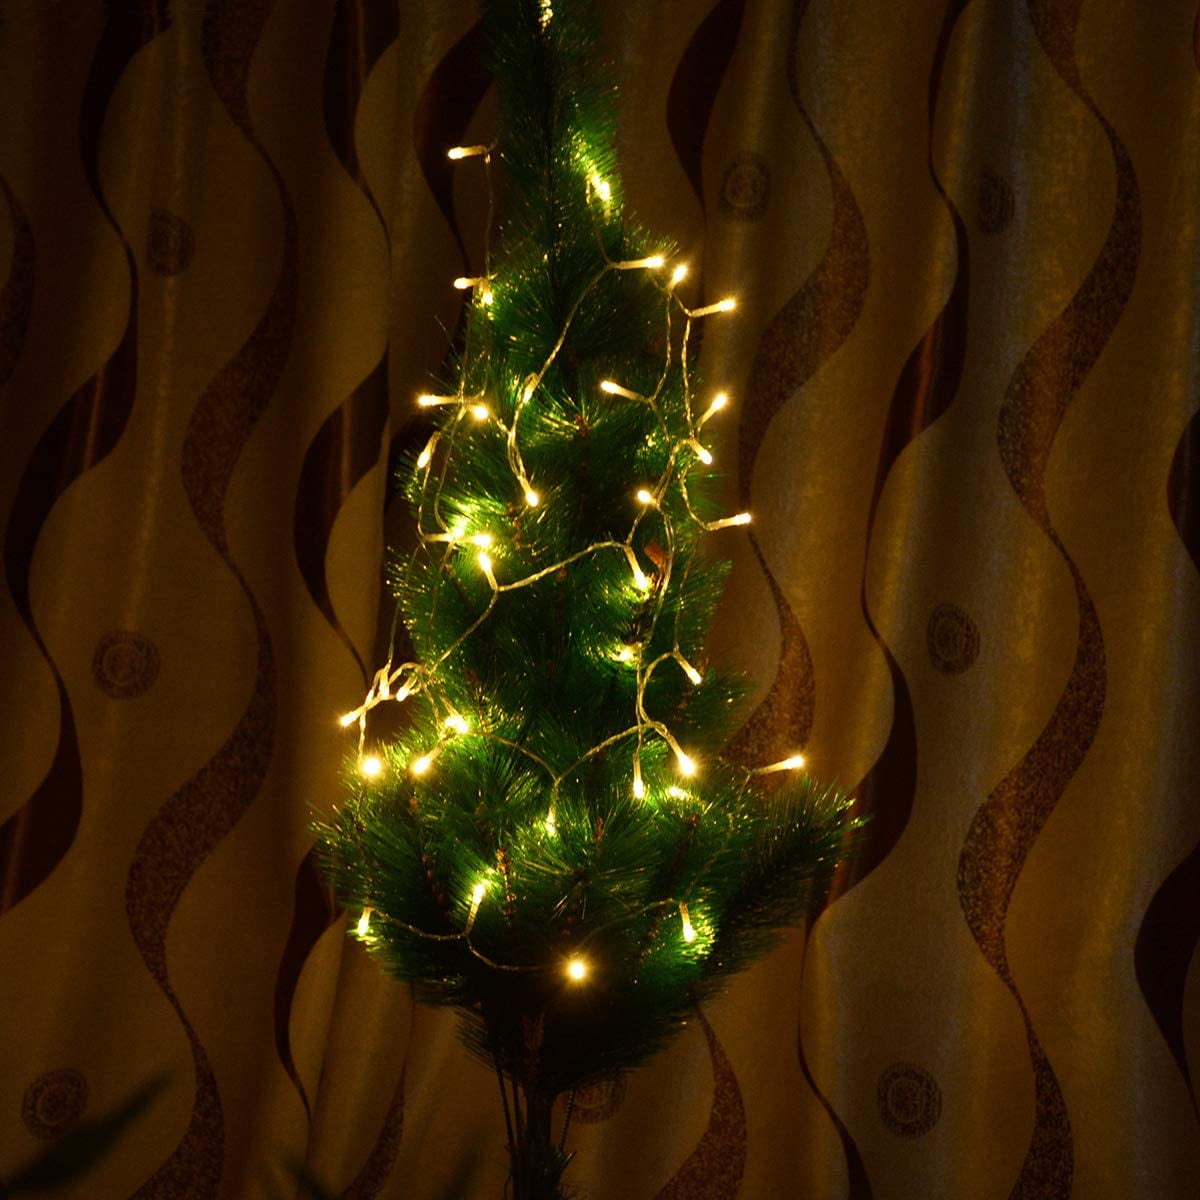 Details about   String of Christmas Lights Textured Star Shaped Plastic Orange Yellow Red Green 